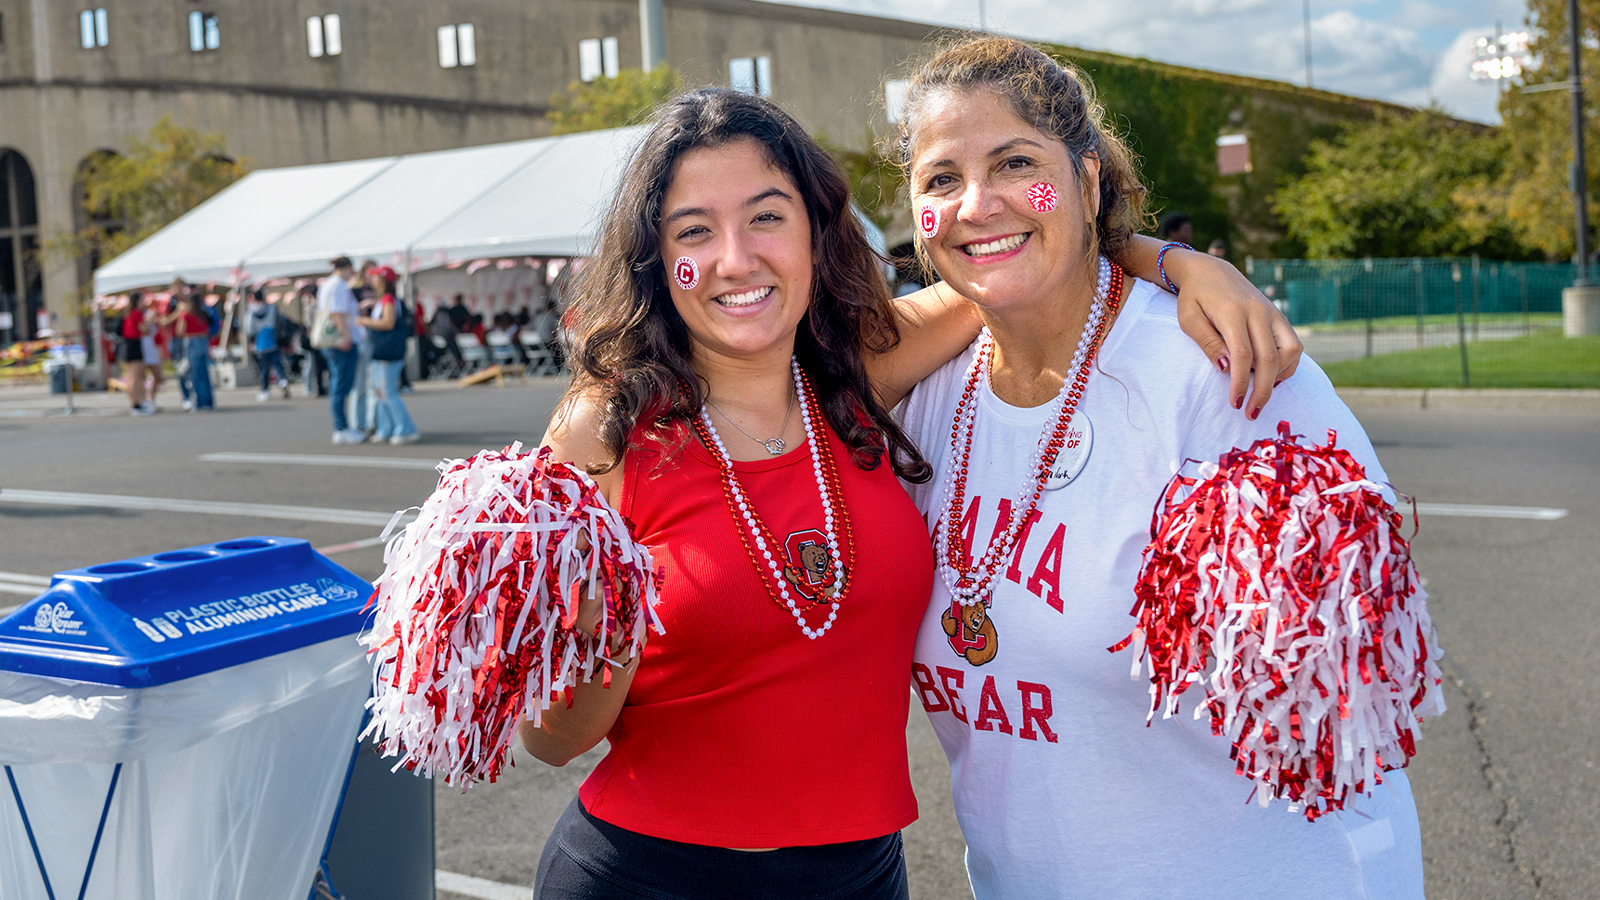 Two women pose for a photo, festooned in Big Red gear